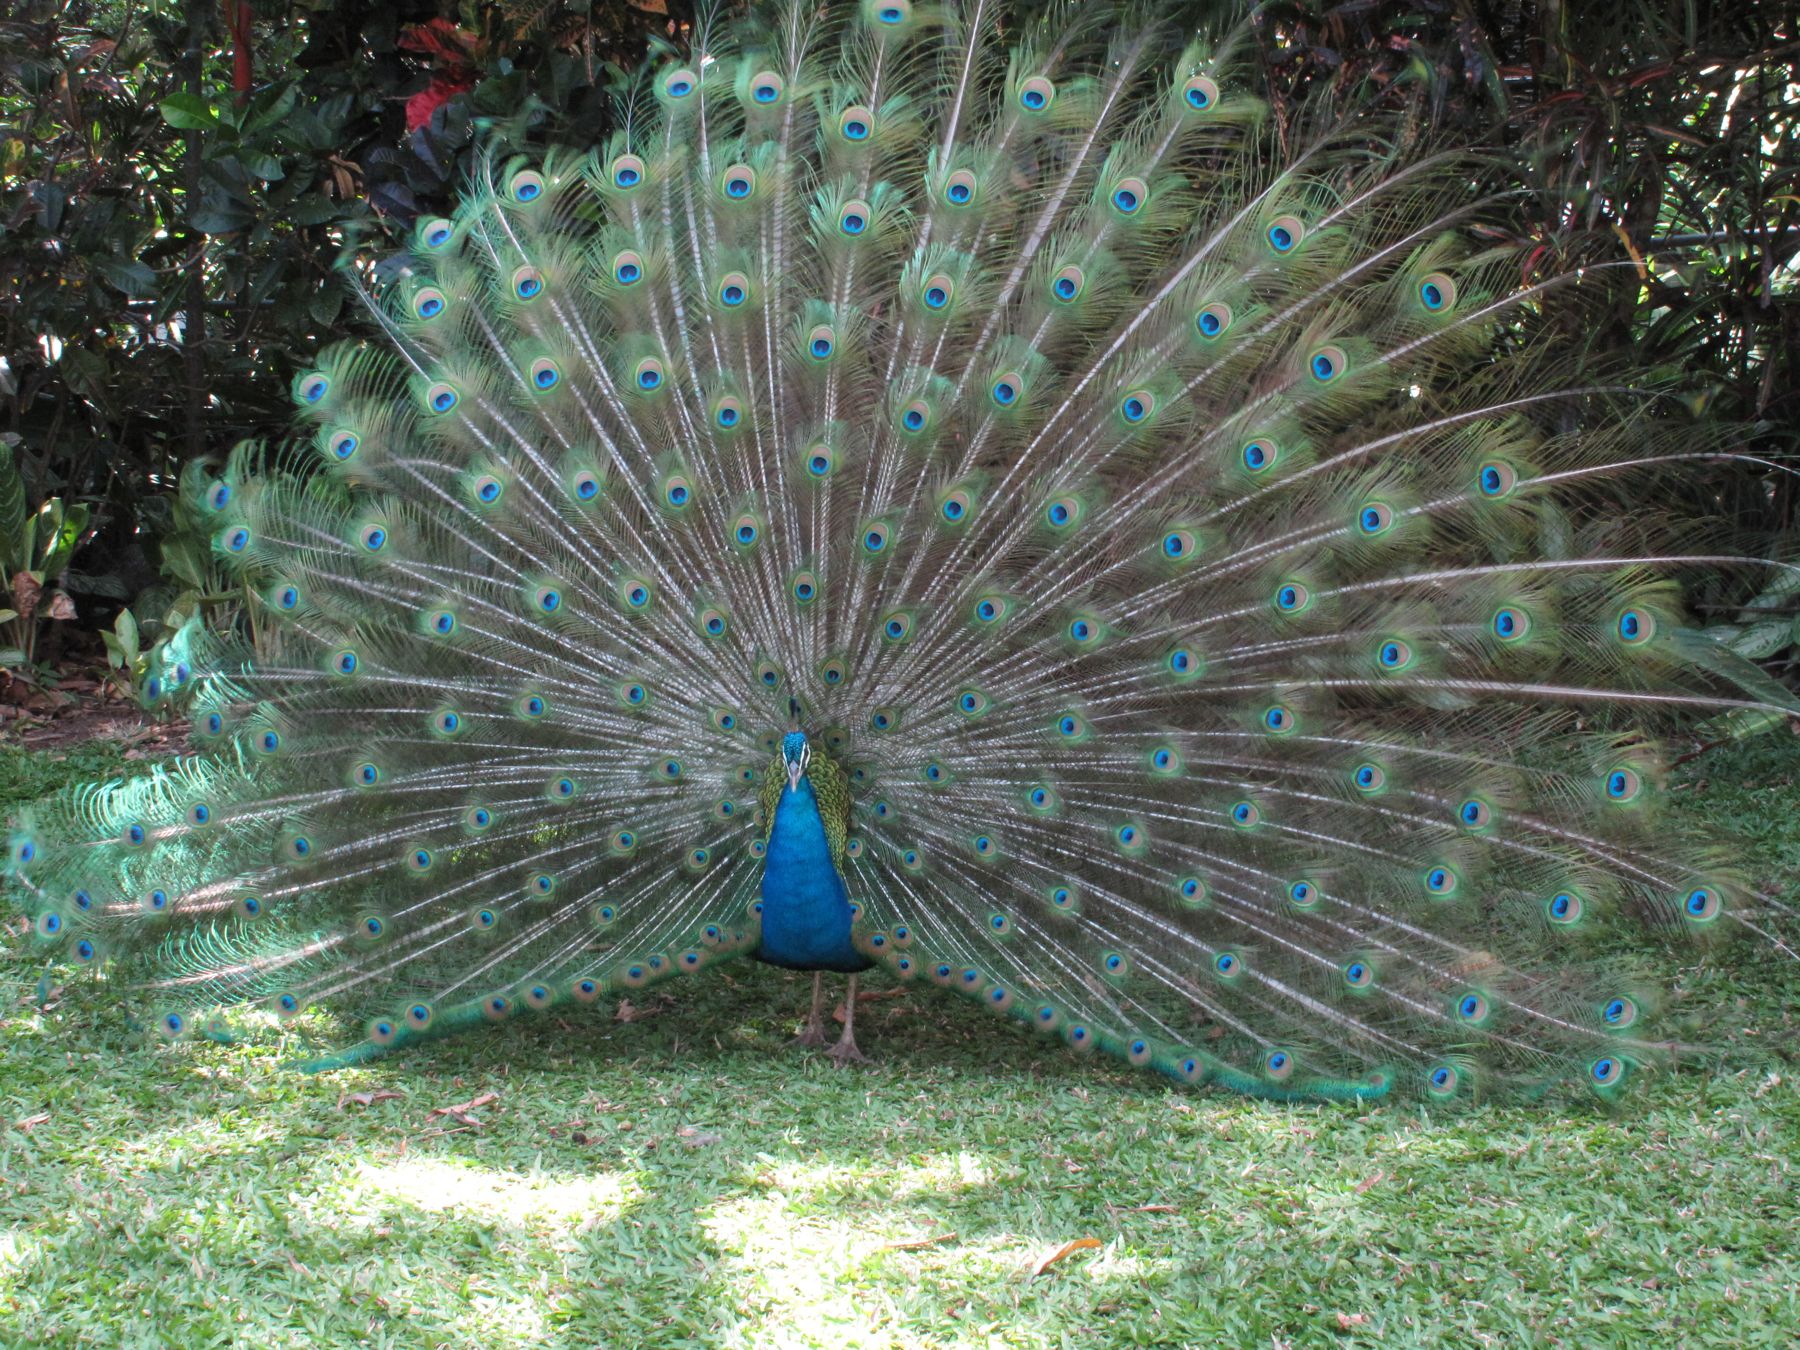 Peacock feathers display